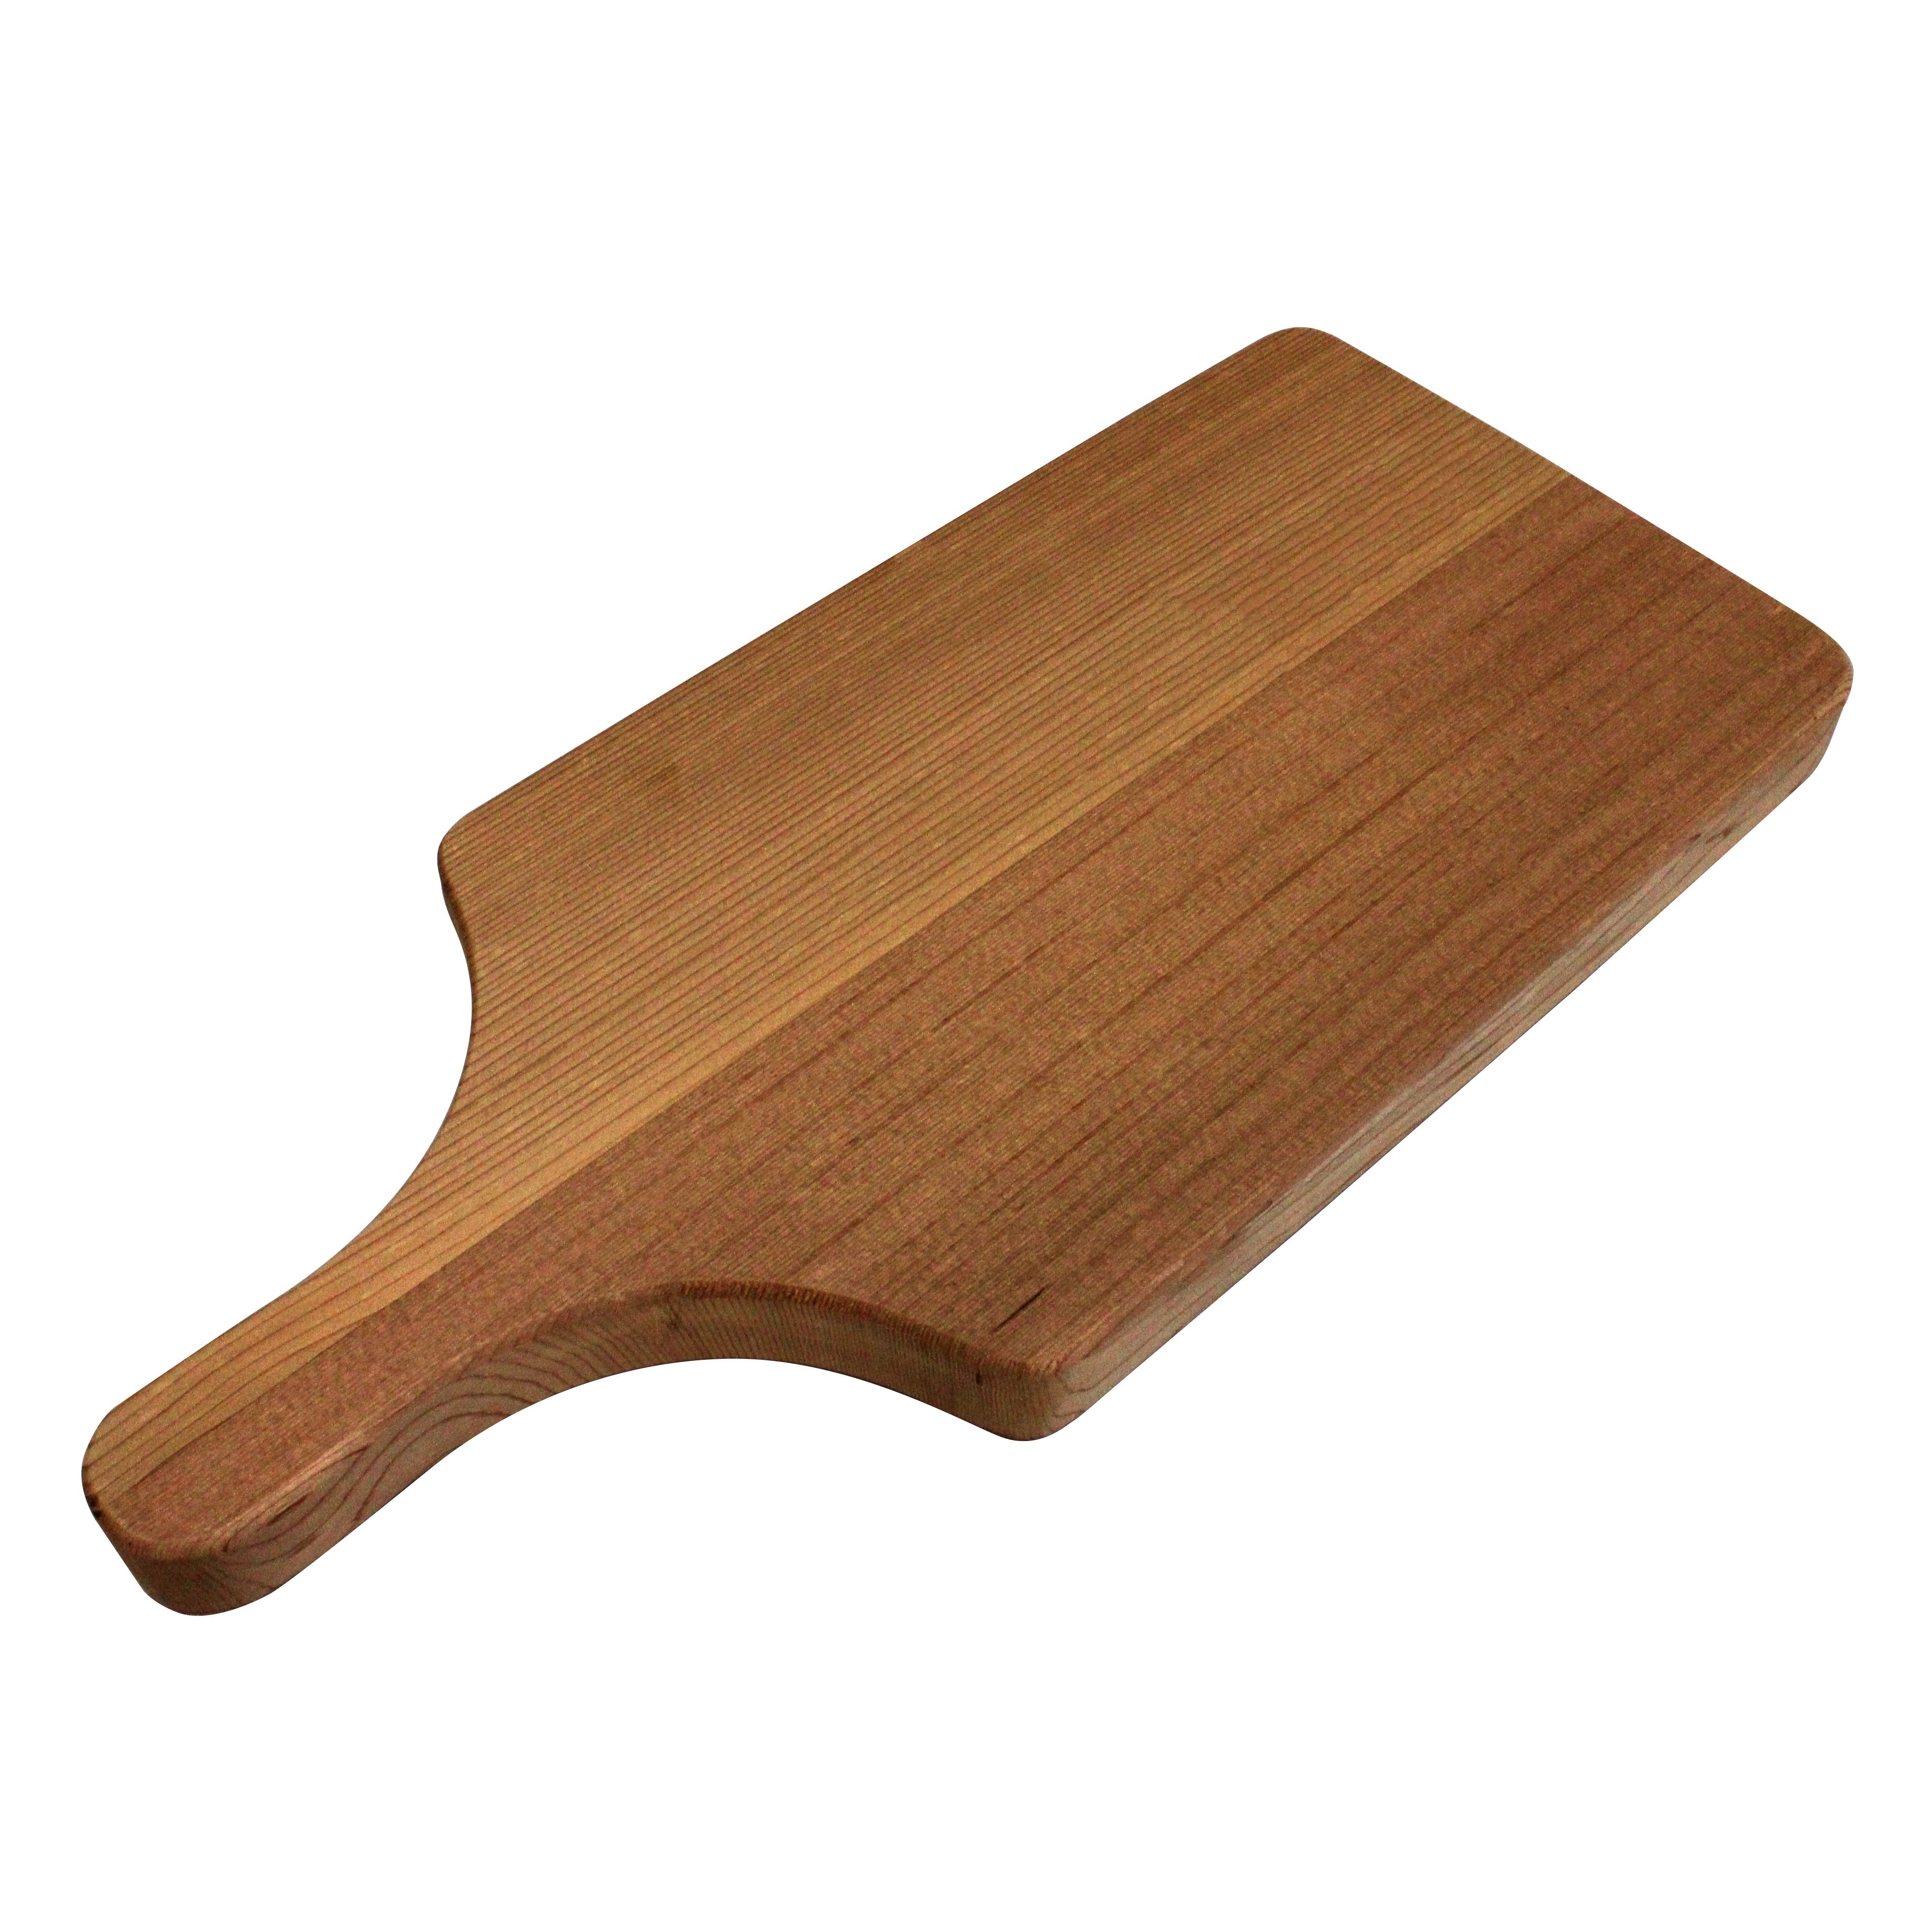 https://www.cedartubs.com/images/products/storeproducts/CuttingBoard1.jpg